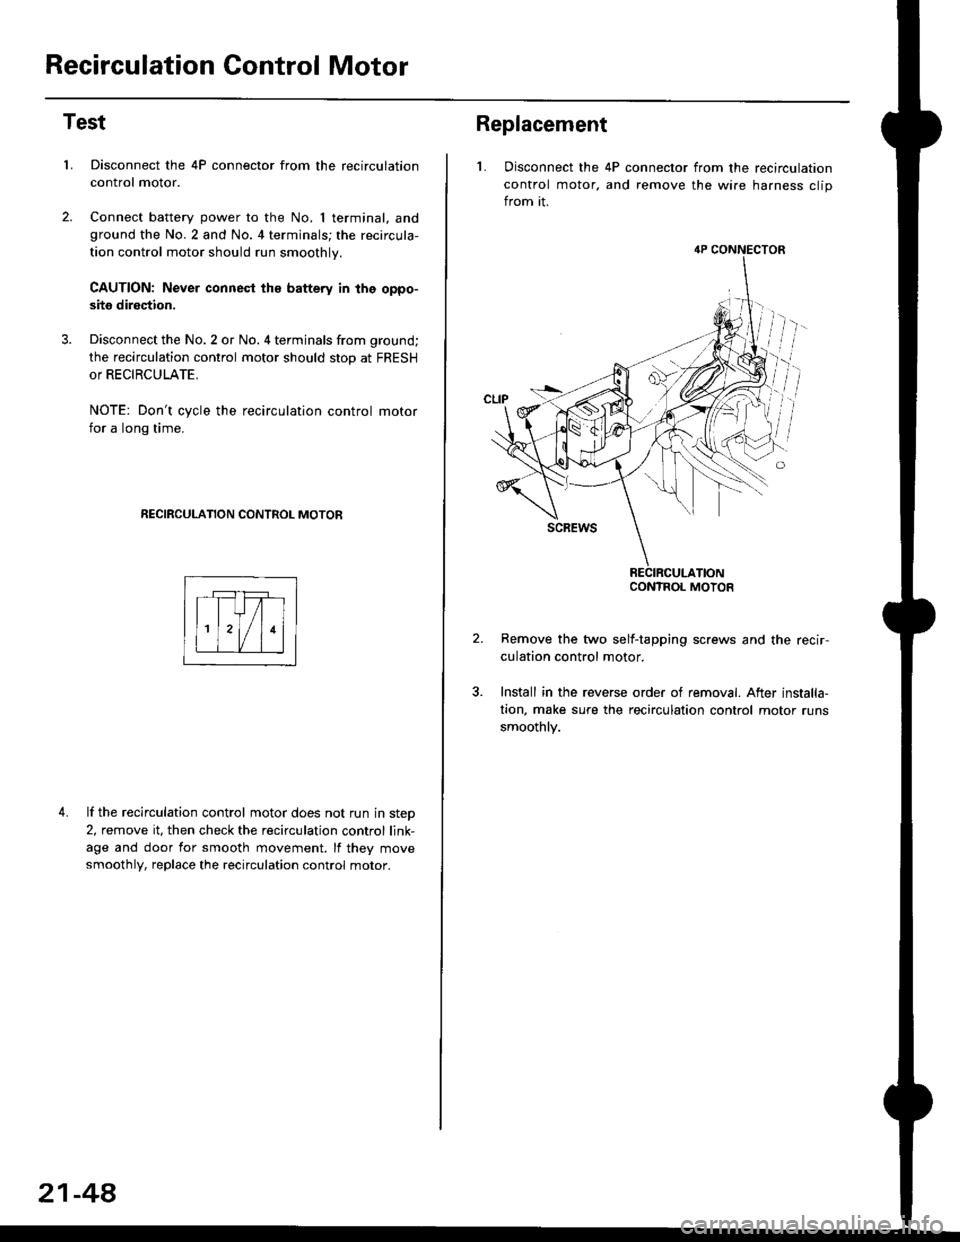 HONDA CIVIC 1997 6.G Workshop Manual Recirculation Control Motor
Test
LDisconnect the 4P connector from the recirculation
control motor.
Connect battery power to the No. I terminal, andground the No.2 and No. 4 terminals; the recircula-
